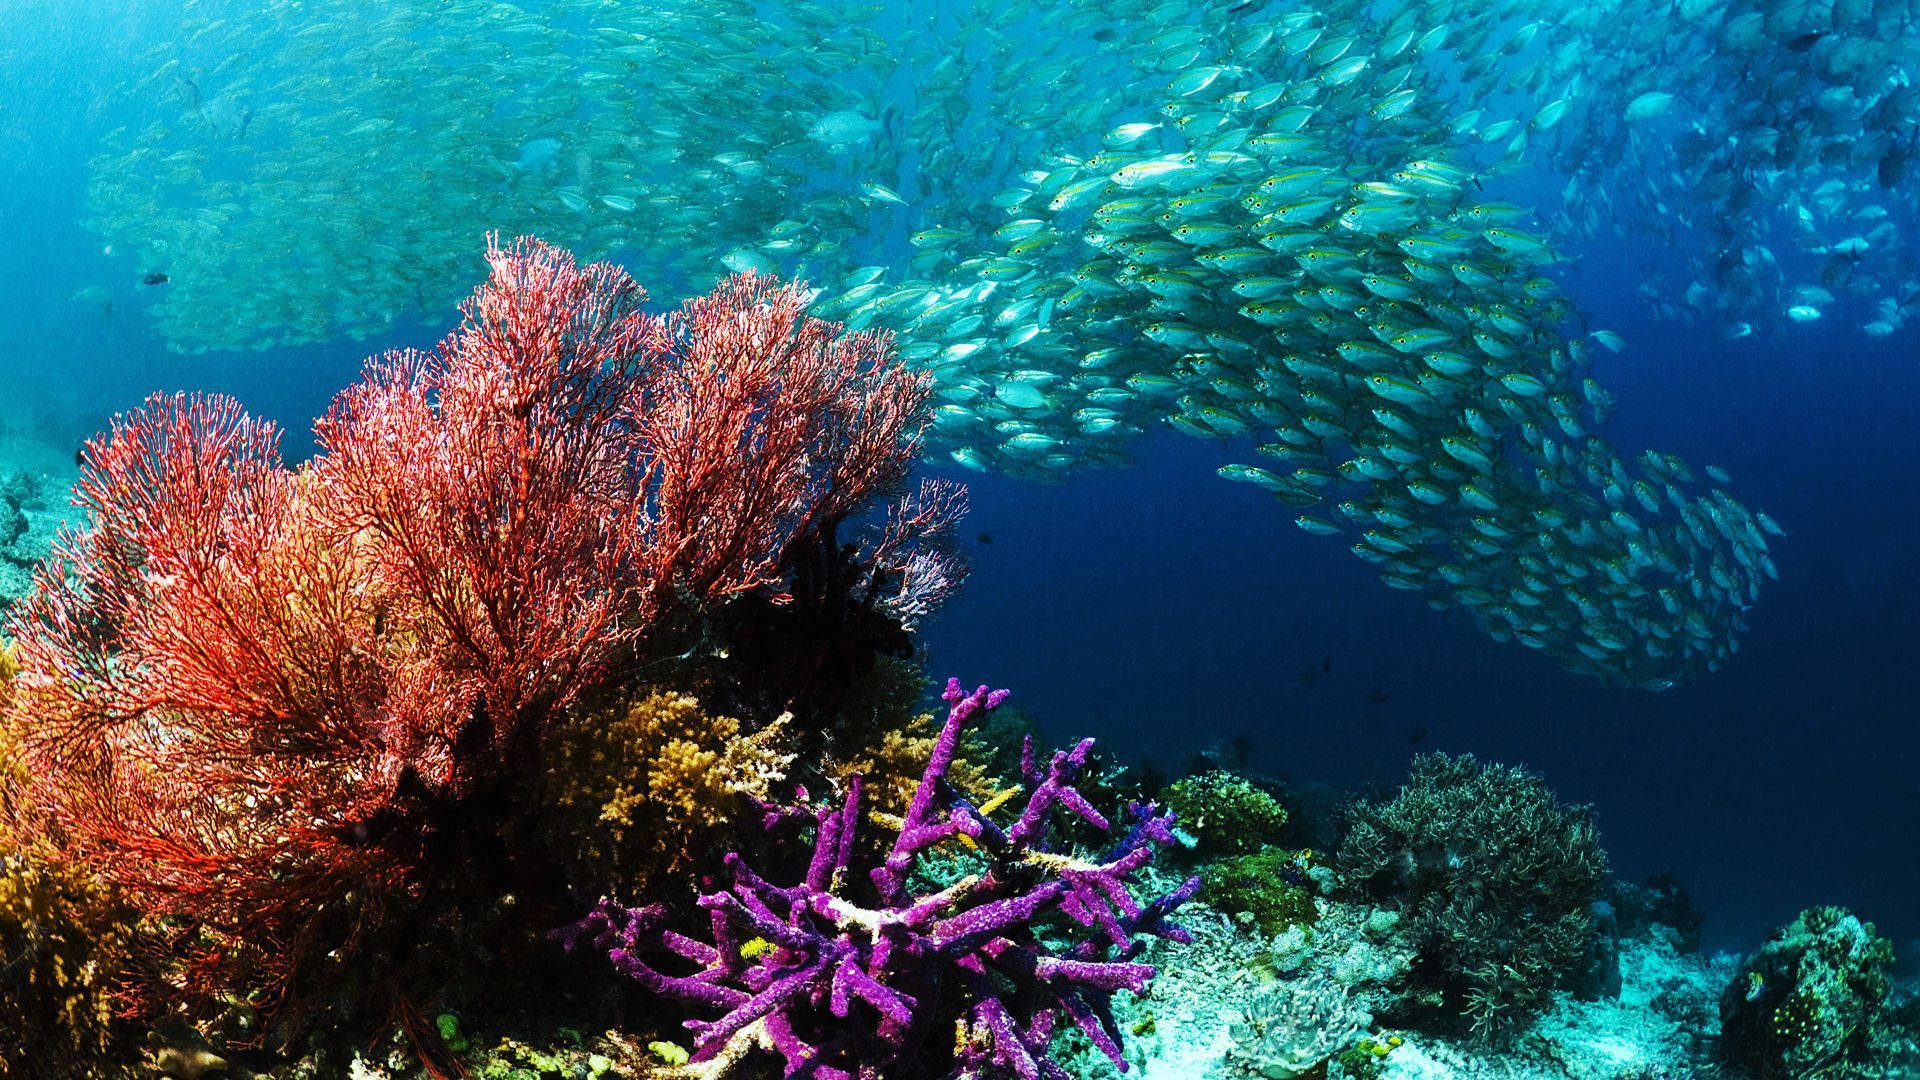 An underwater oasis full of colorful corals and a school of fish. Wallpaper